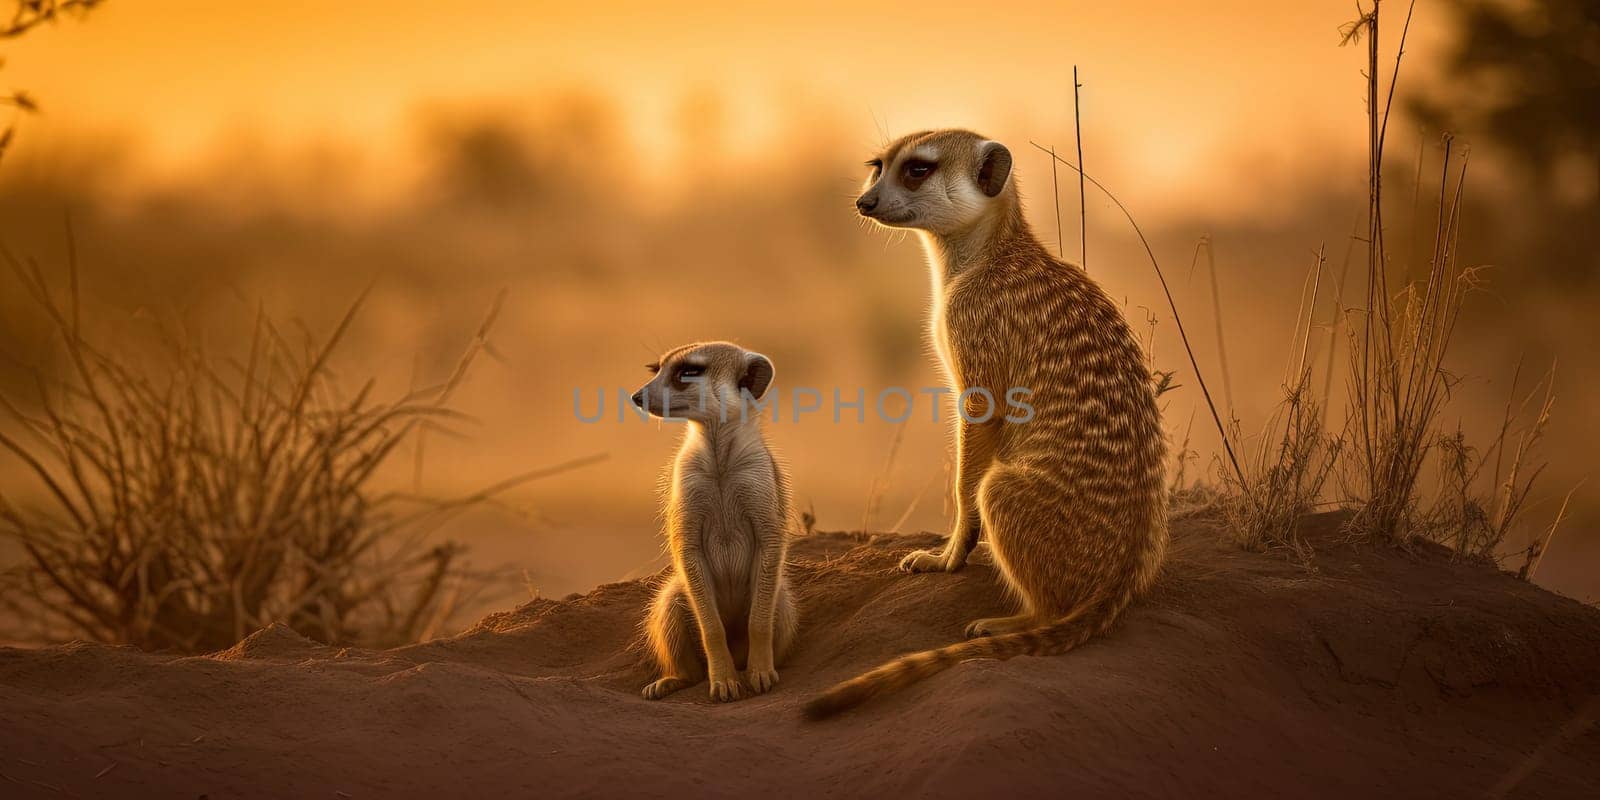 Adult meerkat with baby sitting on sand looking in distance by tan4ikk1